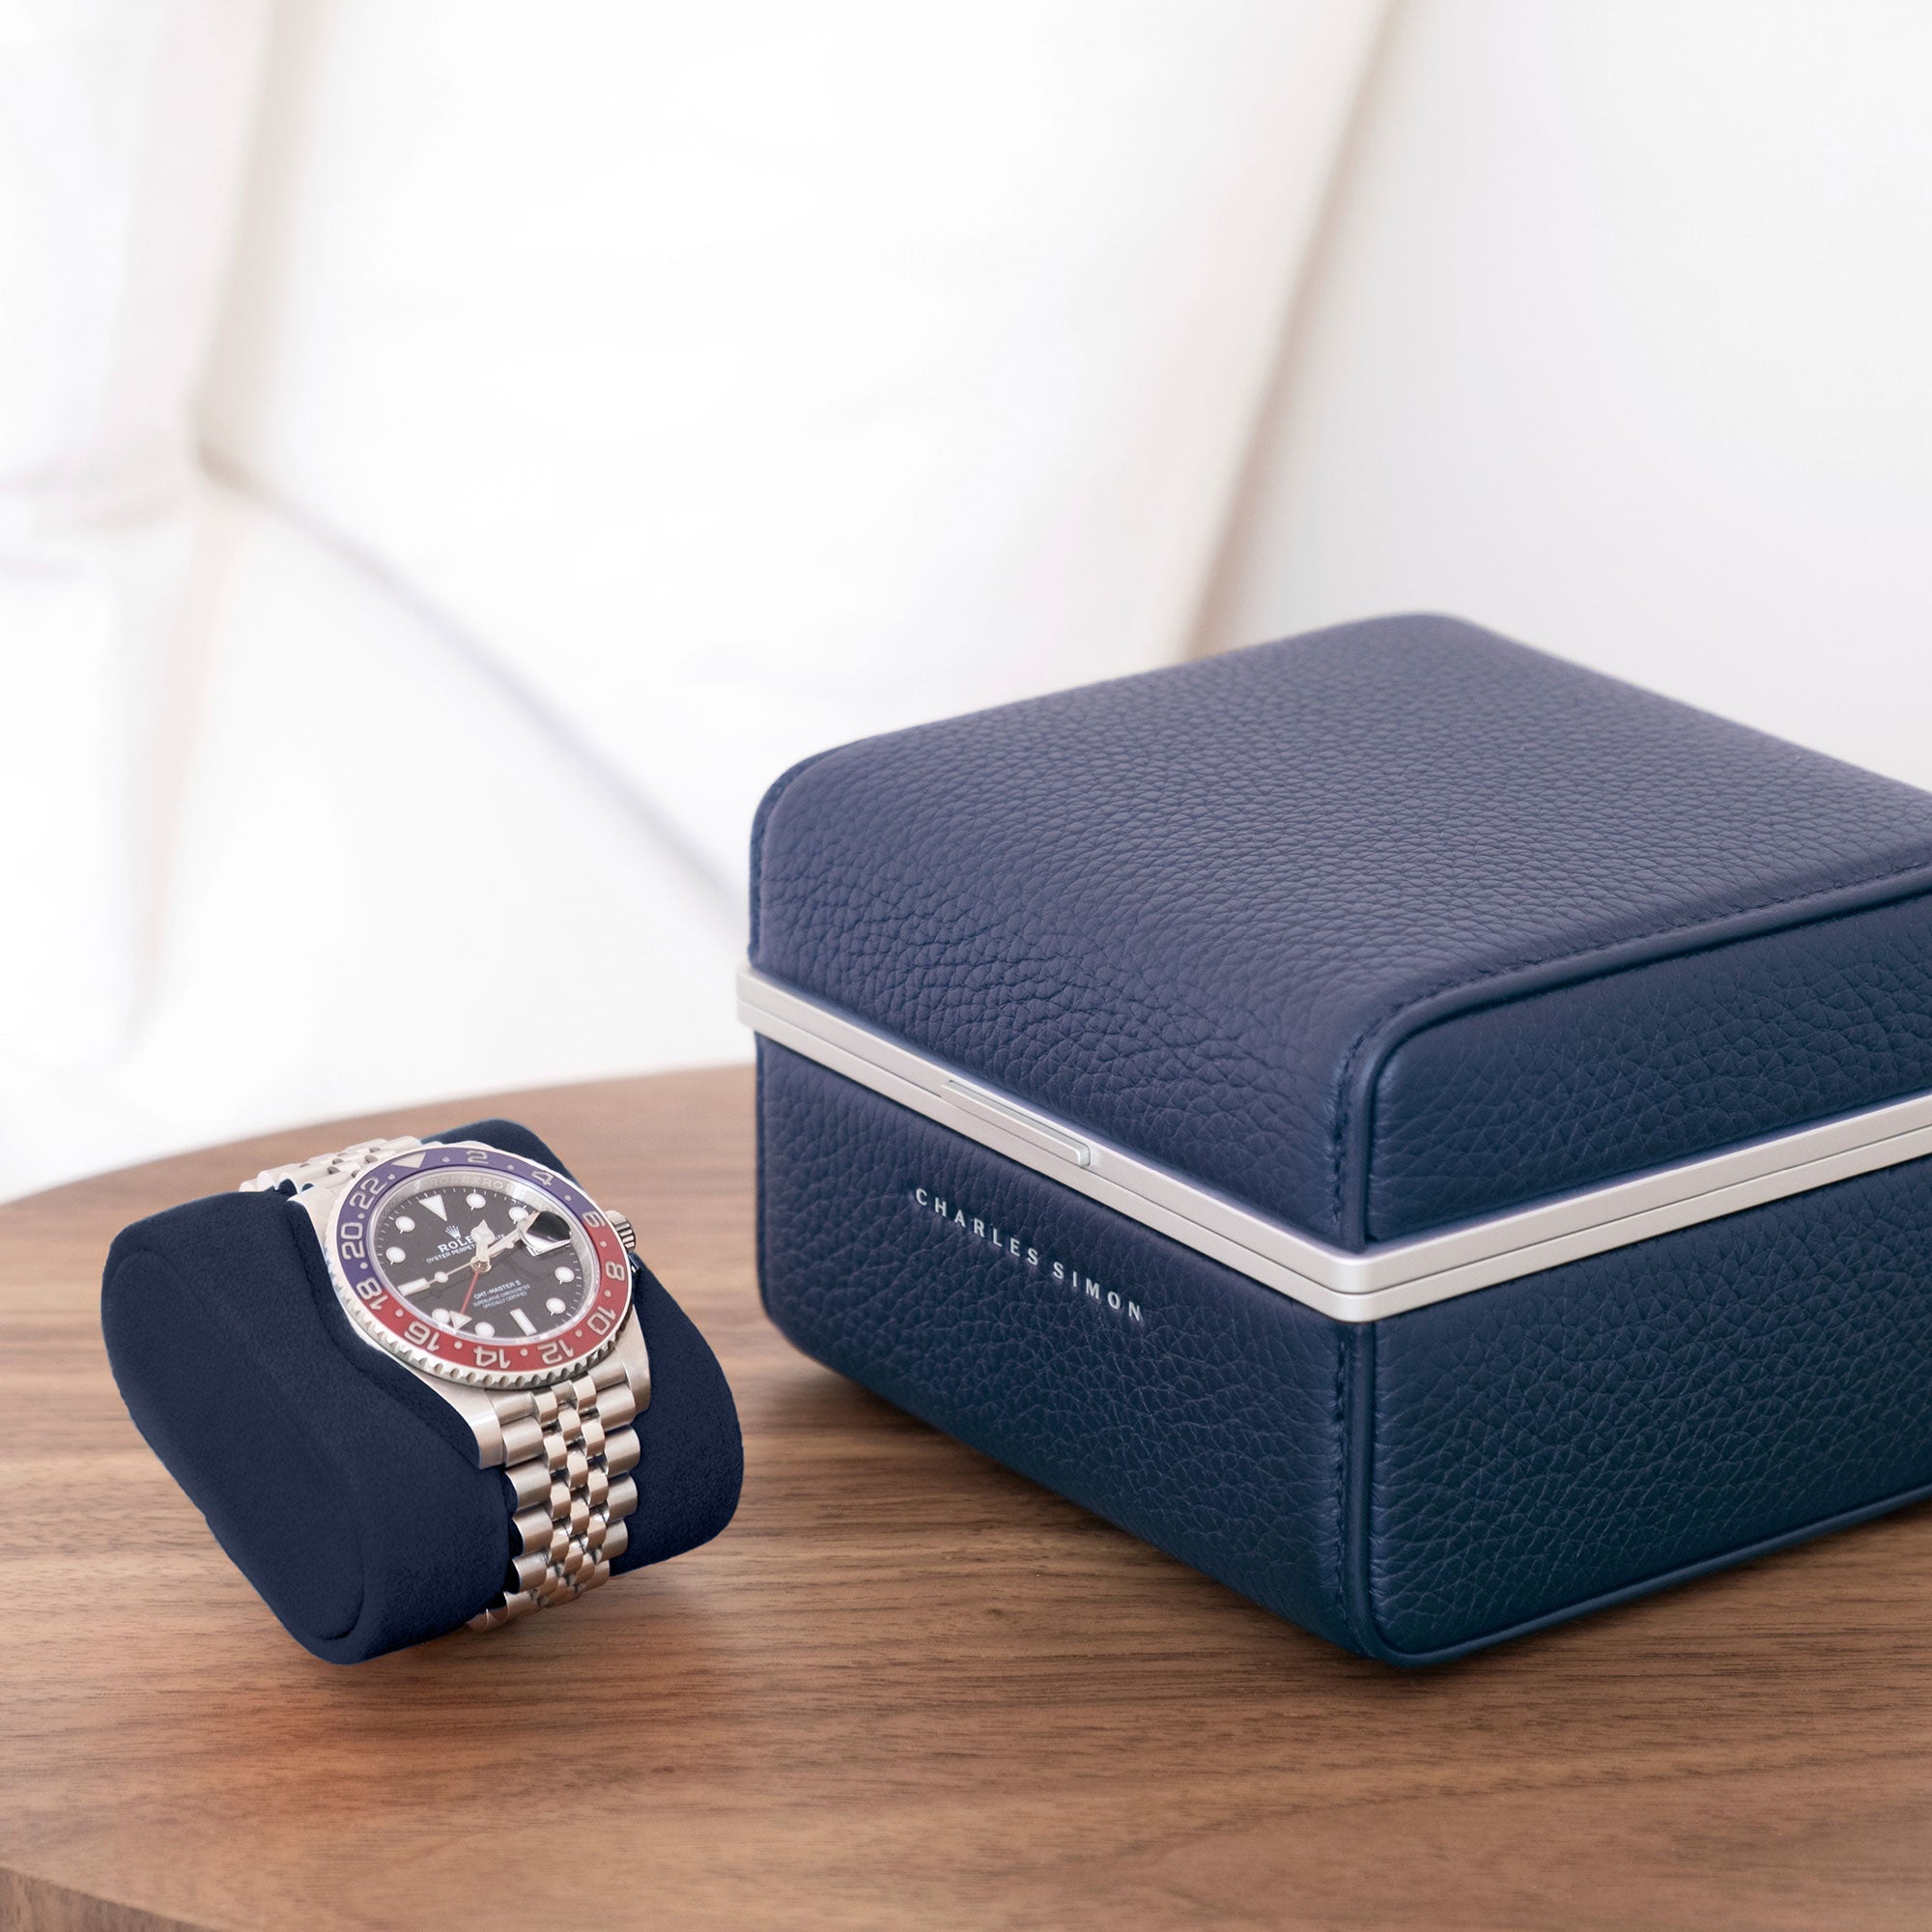 Lifestyle photo of sapphire Eaton 1 Watch case sitting closed on minimalist table. Rolex Pepsi luxury watch is placed on deep blue removable Alcantara cushion next to closed luxury watch case